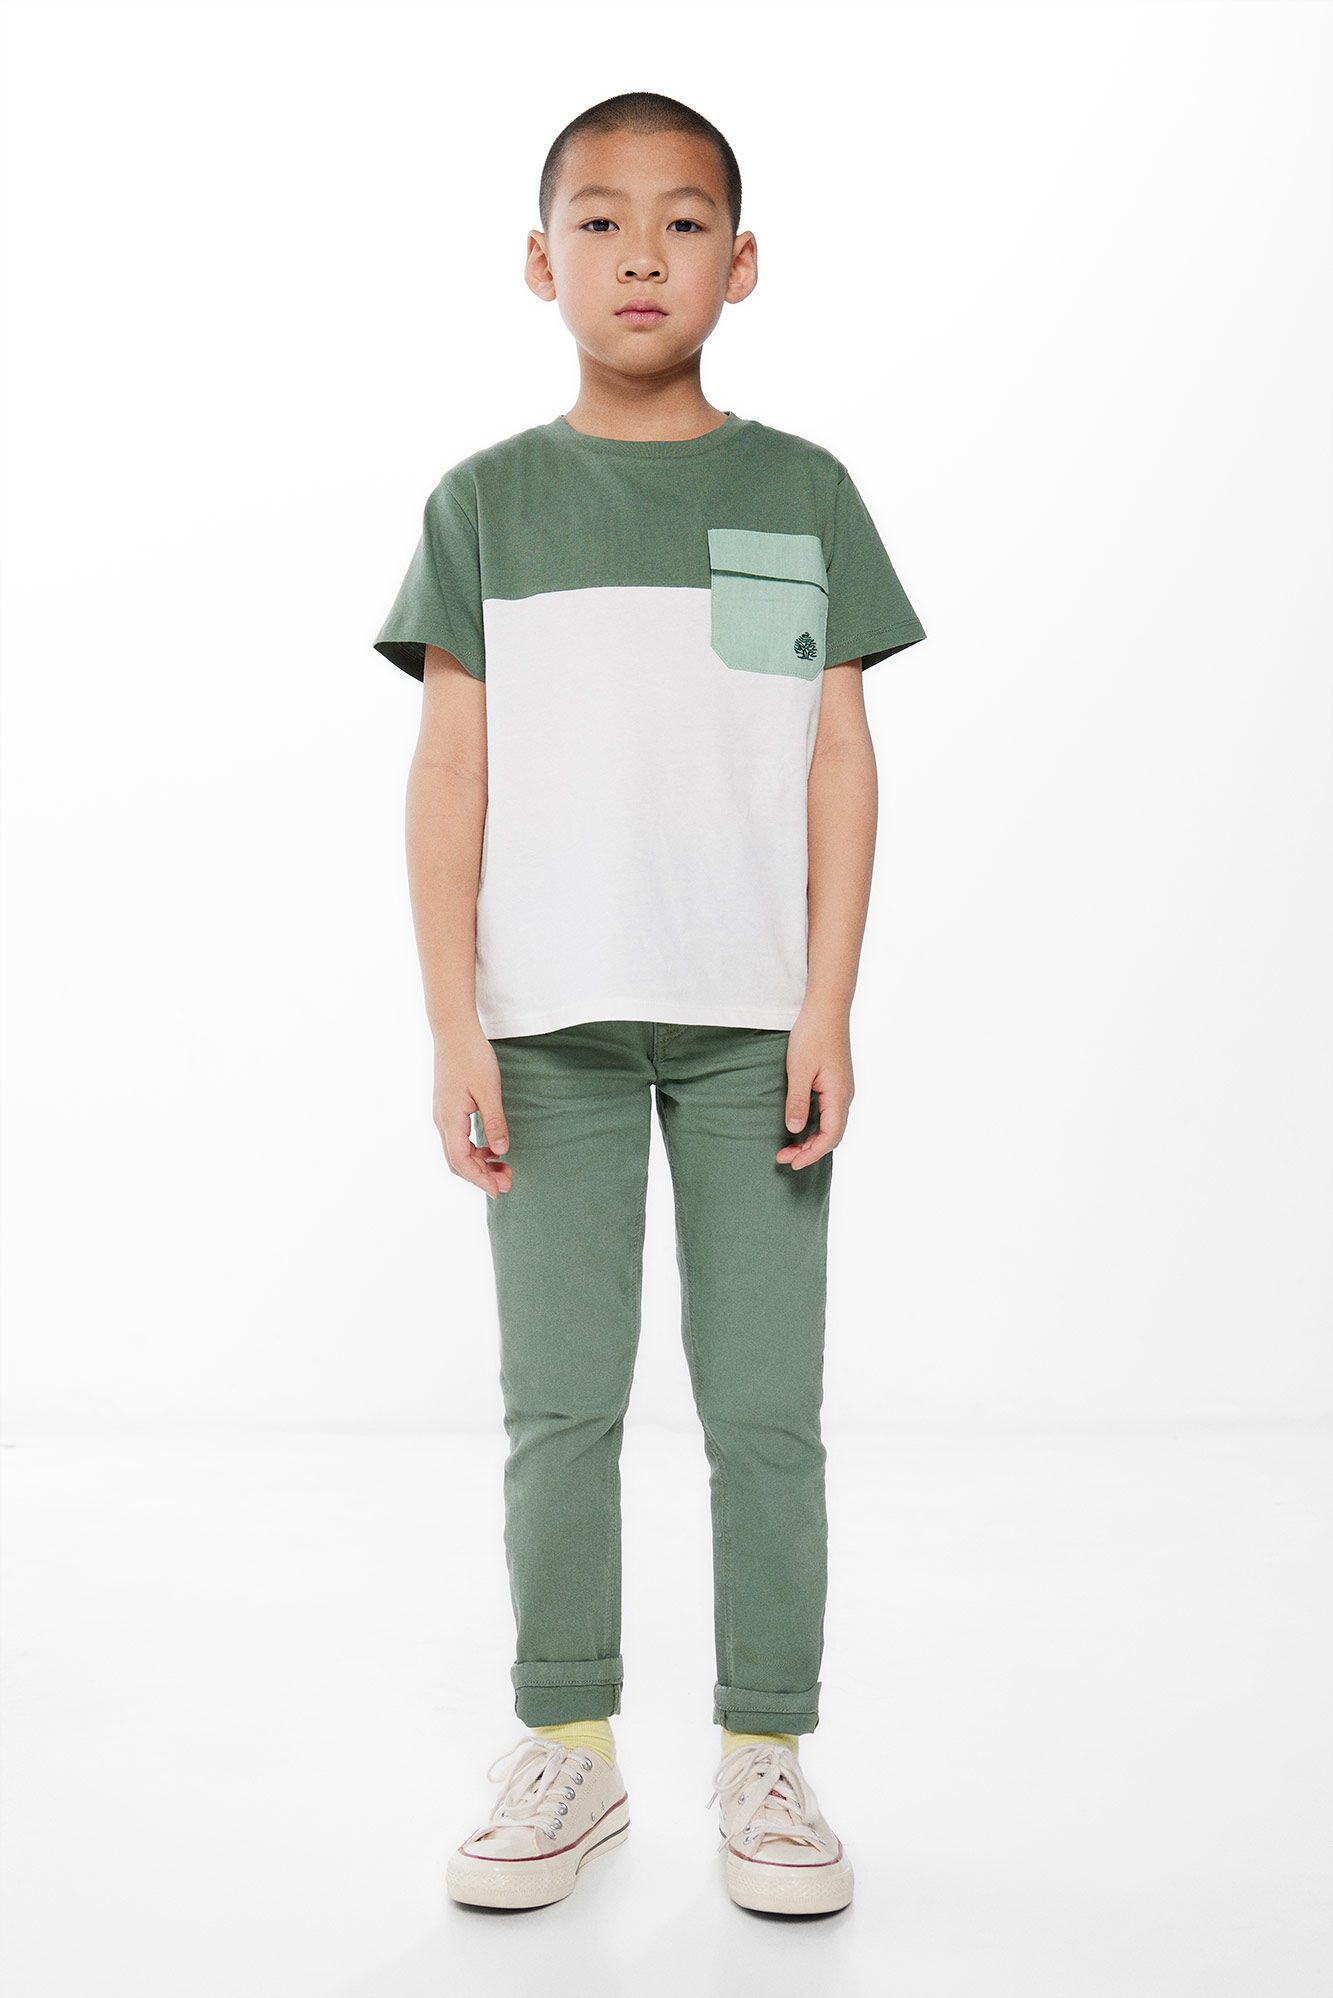 Kids Green Trousers by BO(Y)SMANS on Sale